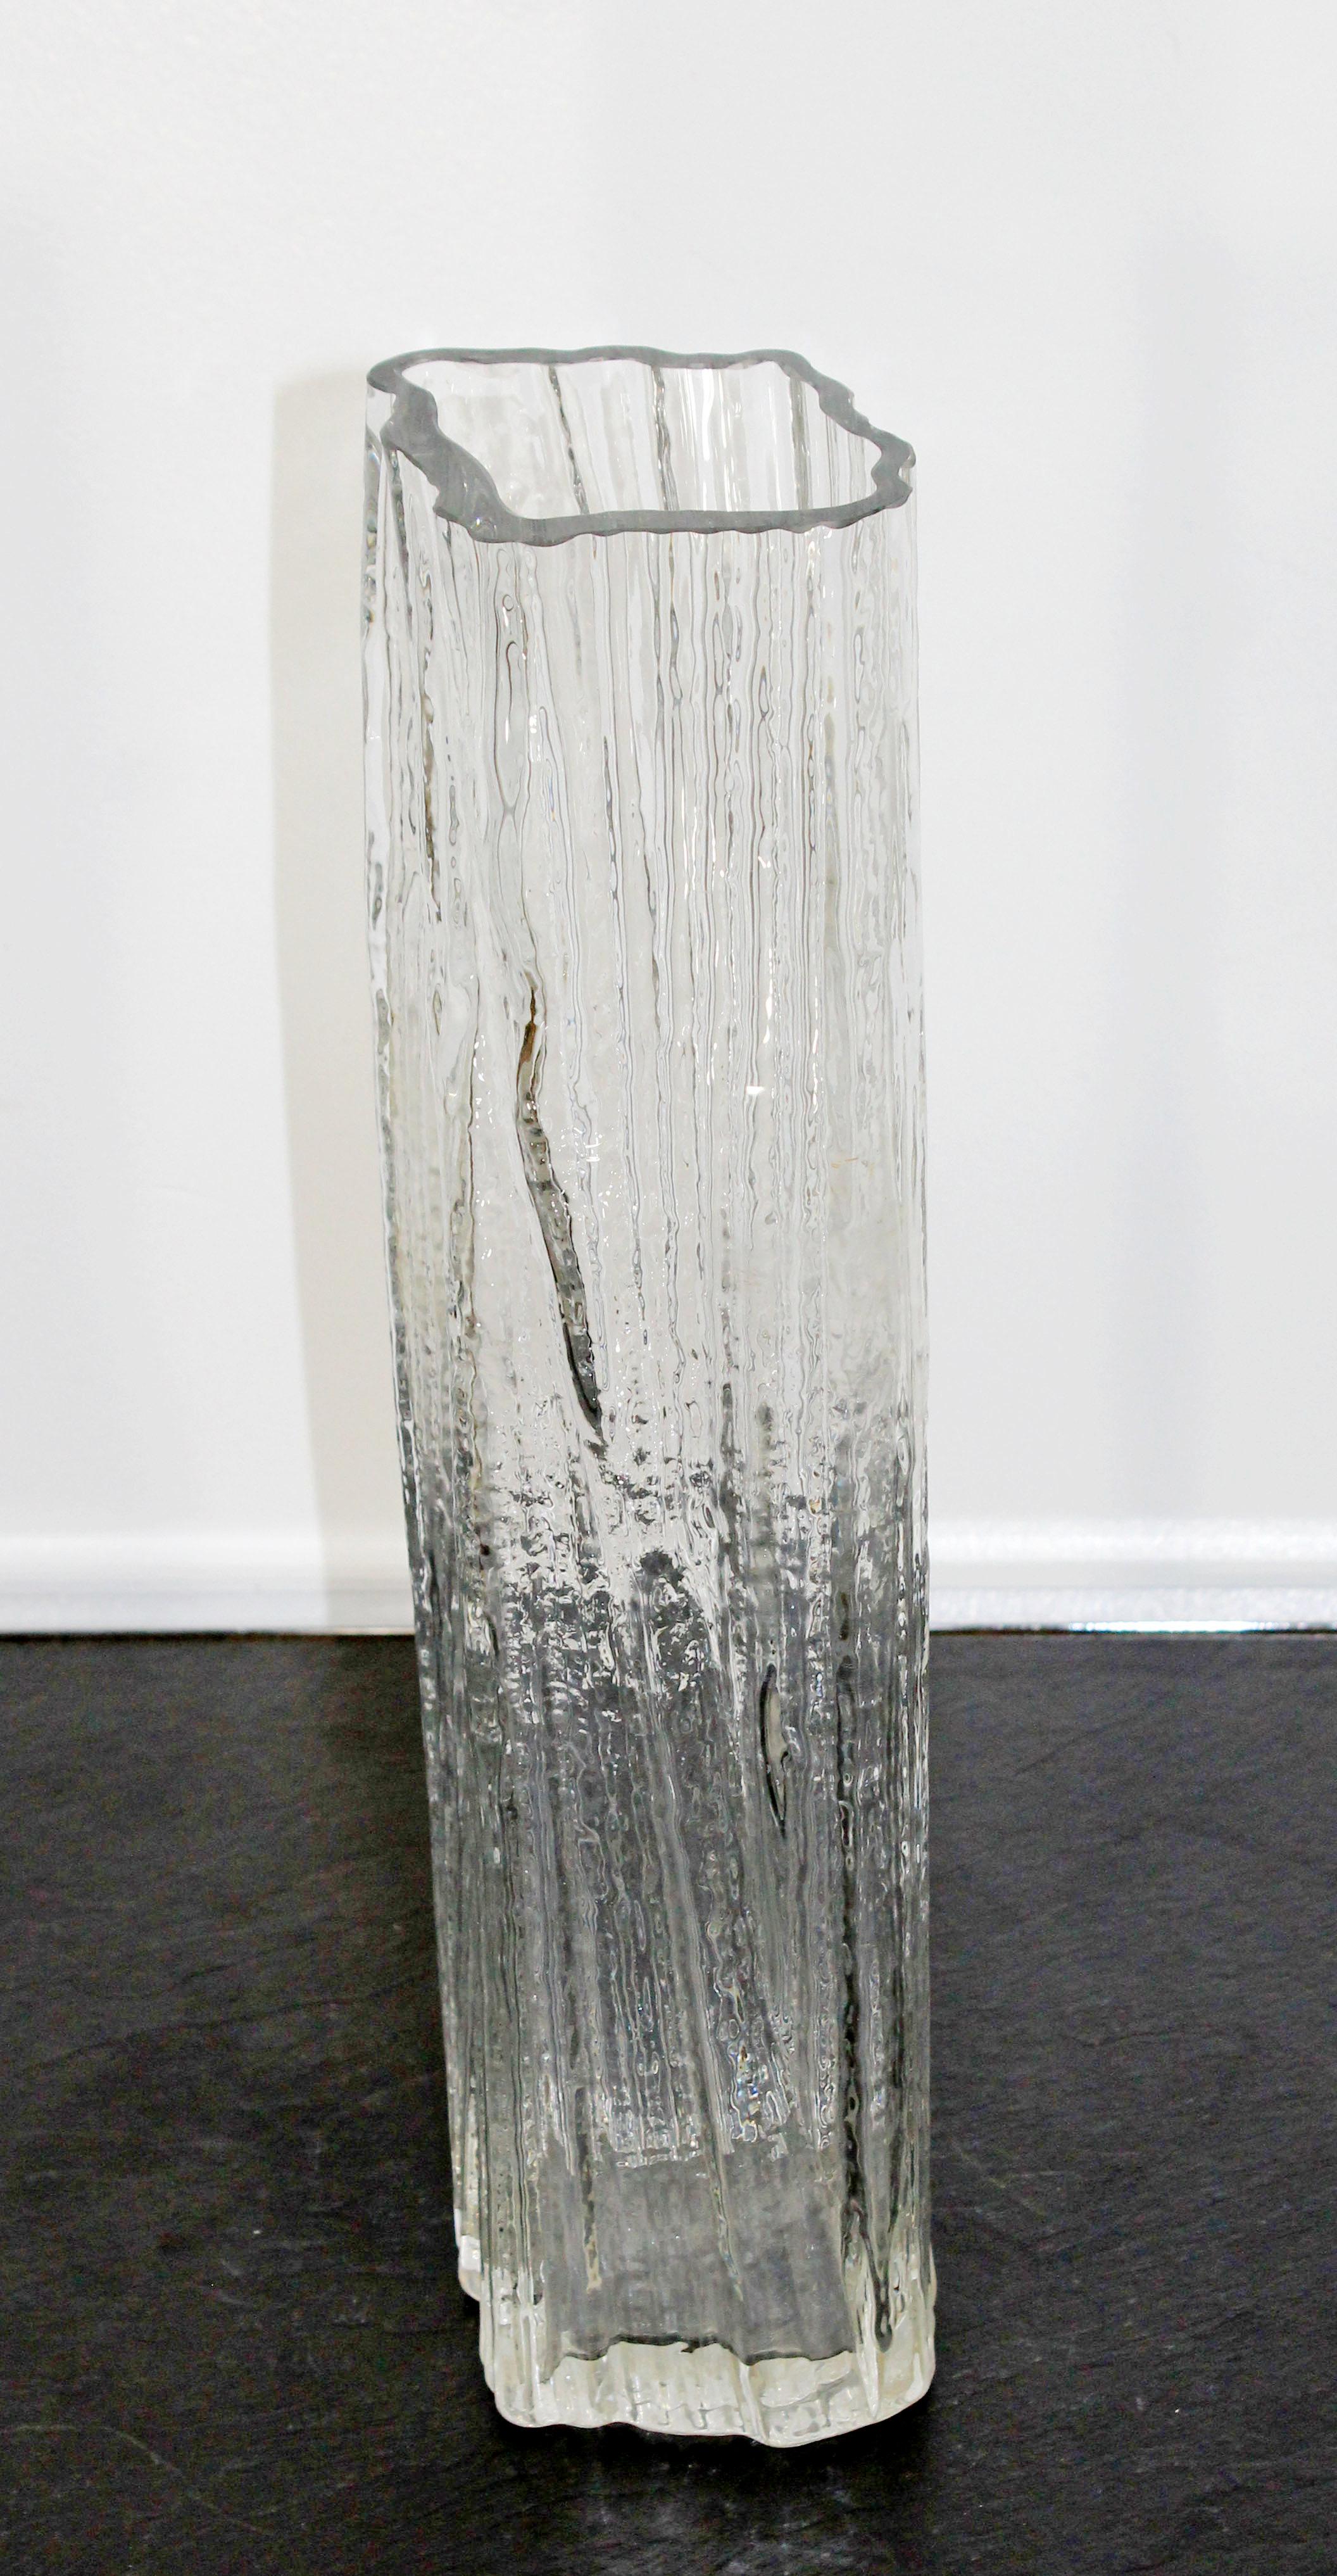 For your consideration is a beautiful, Studio Line ice glass vase, by Martin Freyer for Rosenthal, circa the 1960s. In excellent condition. The dimensions are 4